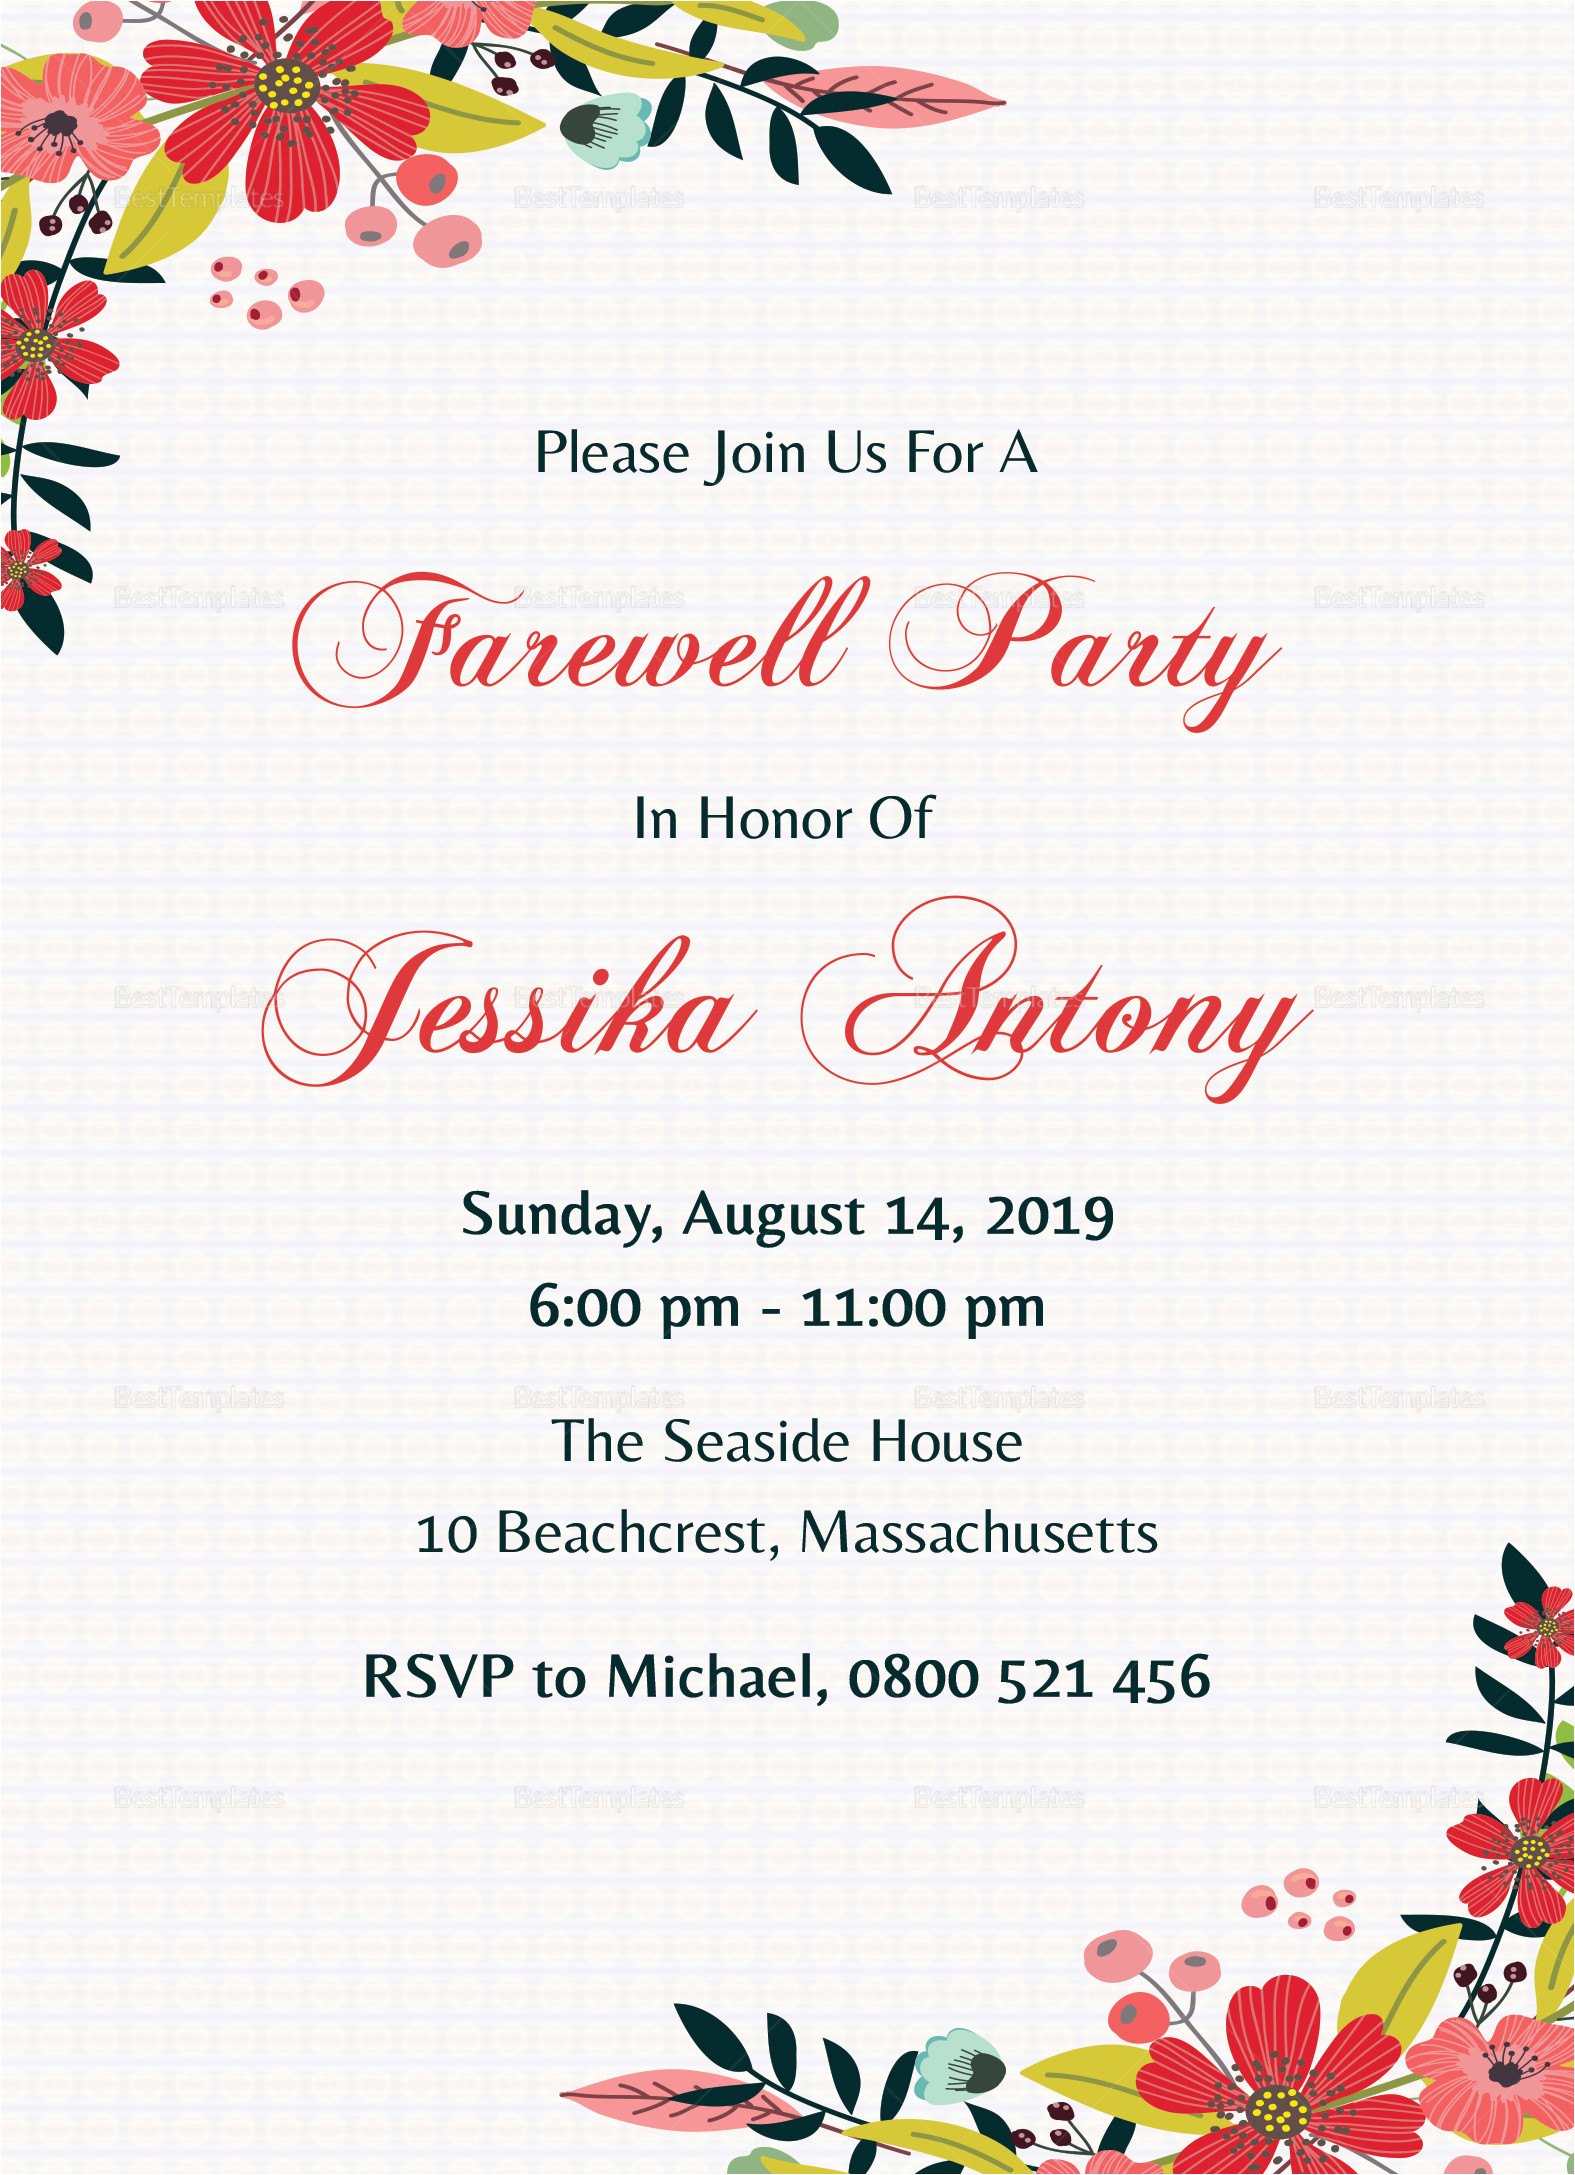 Example Invitation Card Farewell Party Classic Farewell Party Invitation Design Template In Word